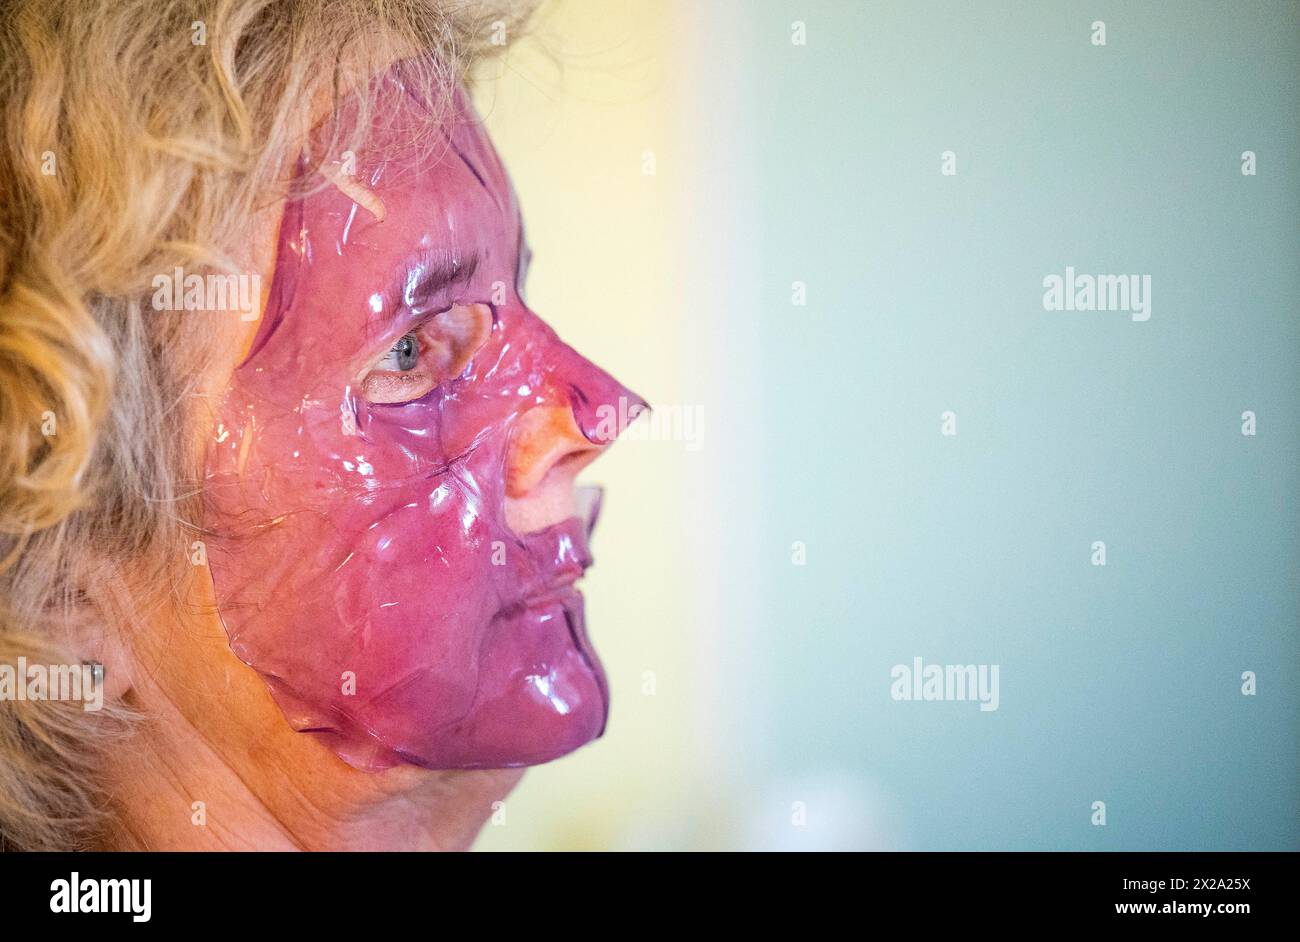 Mature middle aged woman using a purple gel face mask for skin and beauty care Stock Photo